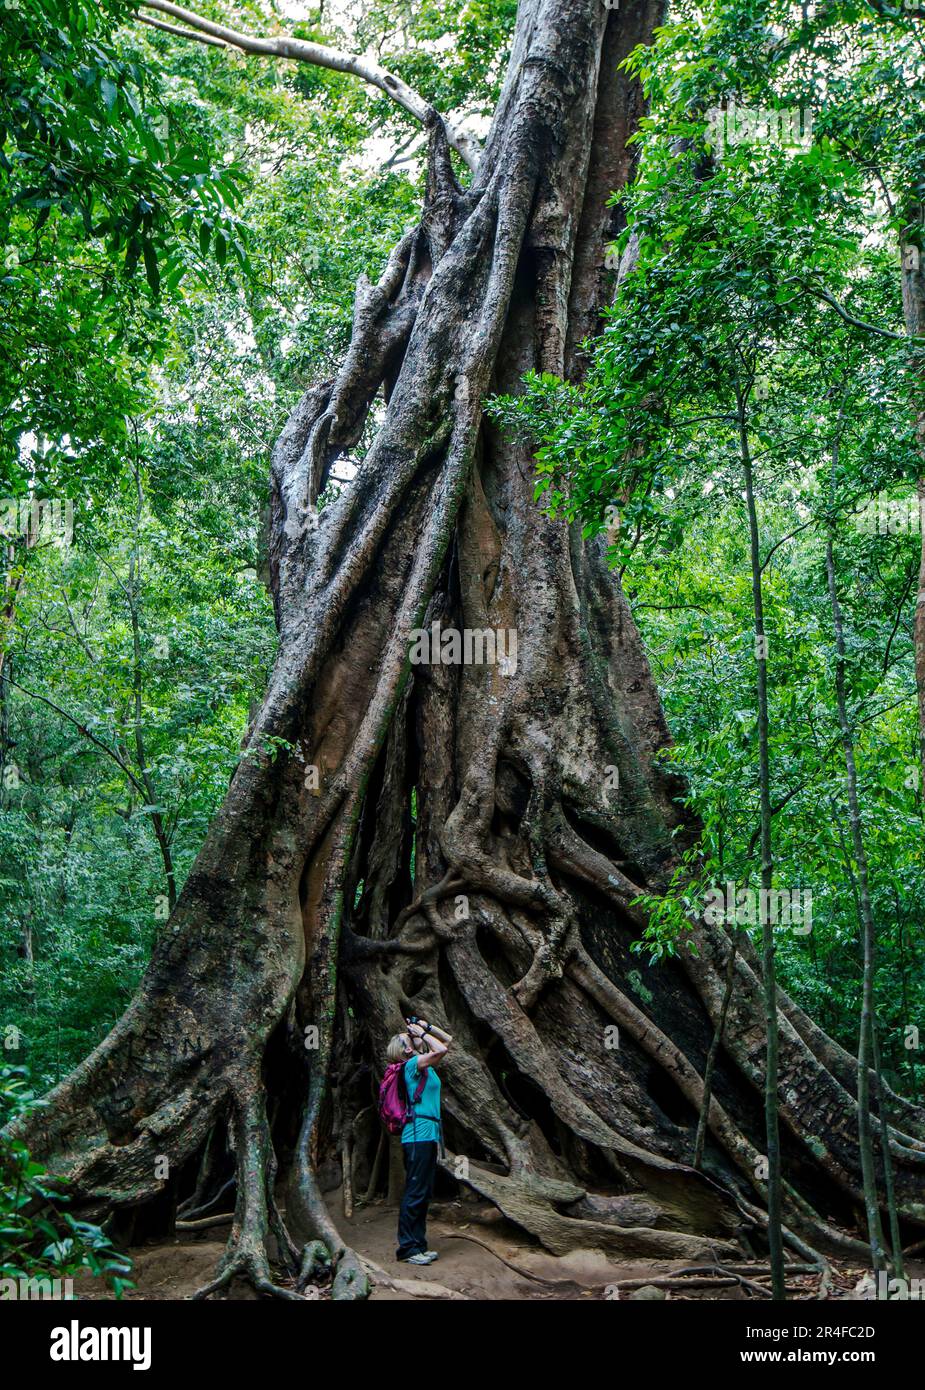 A foreign tourist photographs a 1400 year old banyan tree (ficus benghalensis) at the ancient ruins of Ritigala in central Sri Lanka. Stock Photo